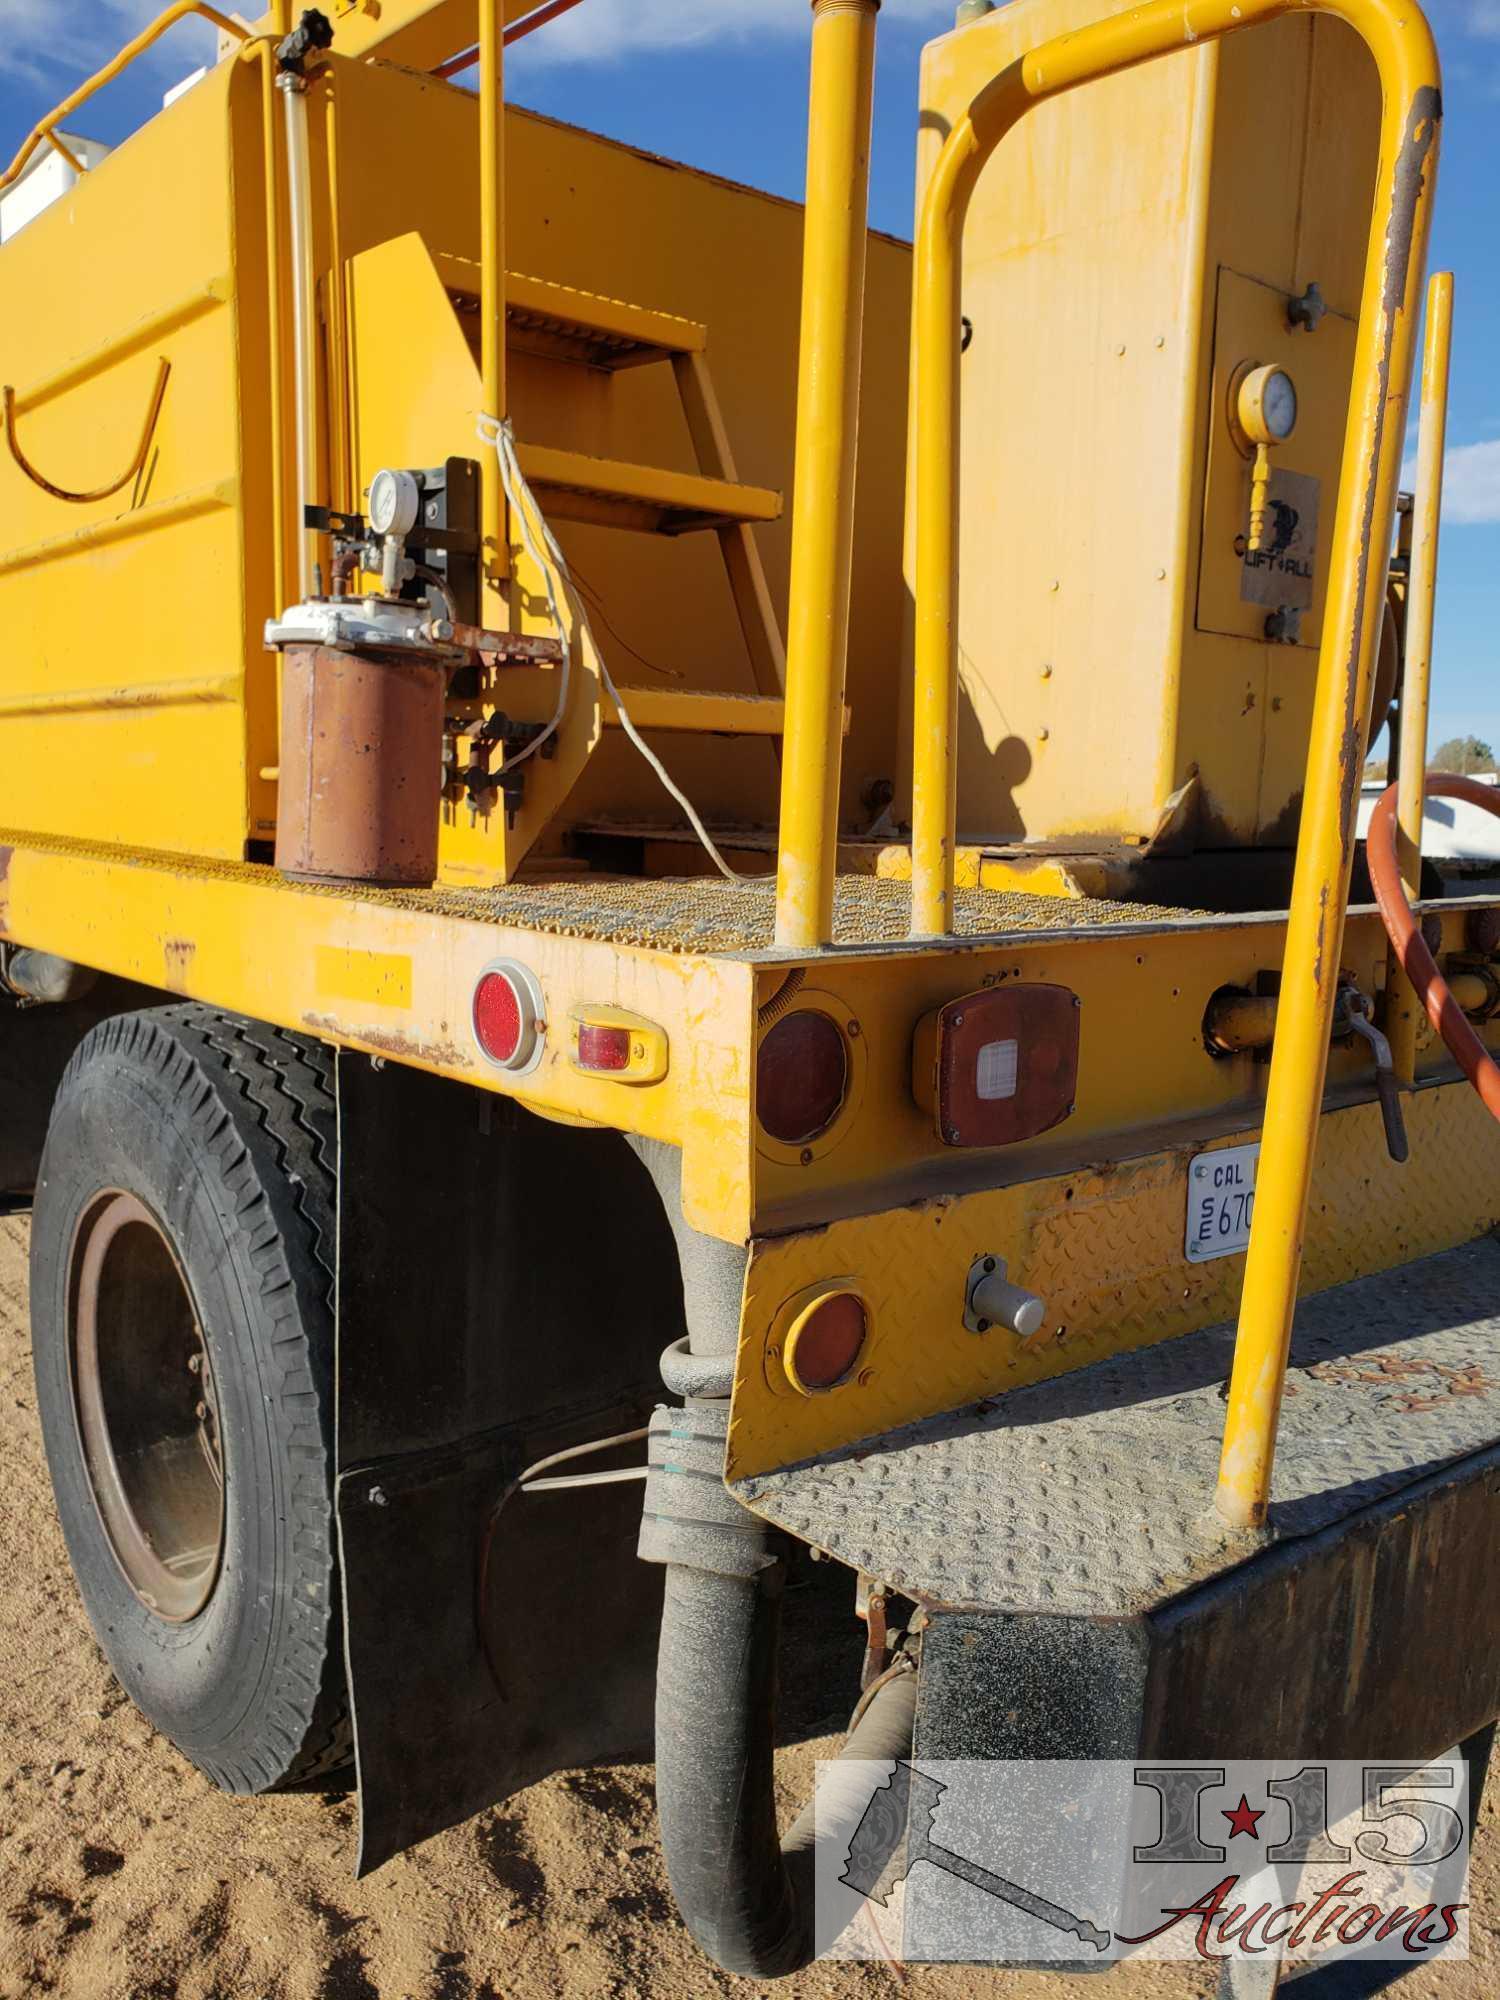 1981 Ford C8000 Bucket/Water Truck, See Video!!